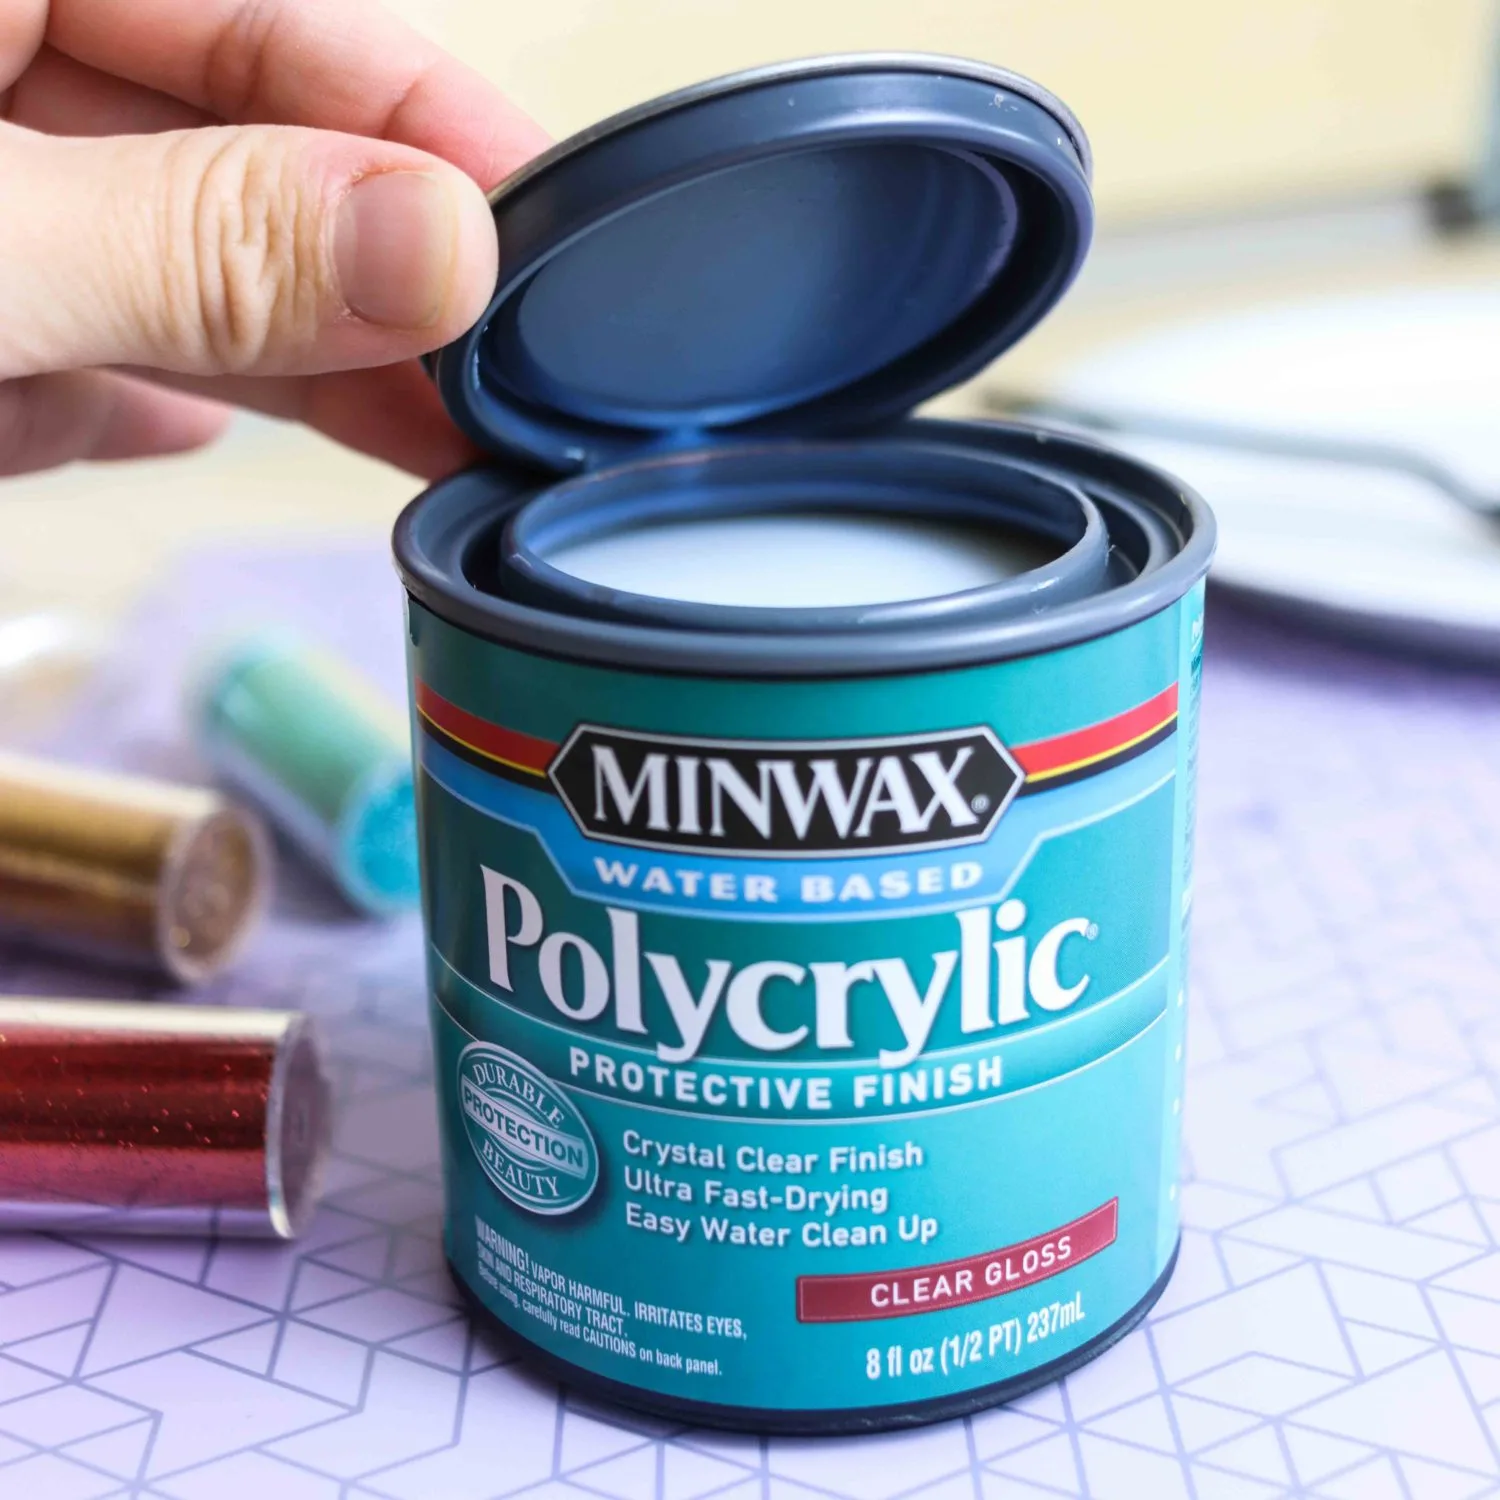 Polycrylic can for Christmas ornaments